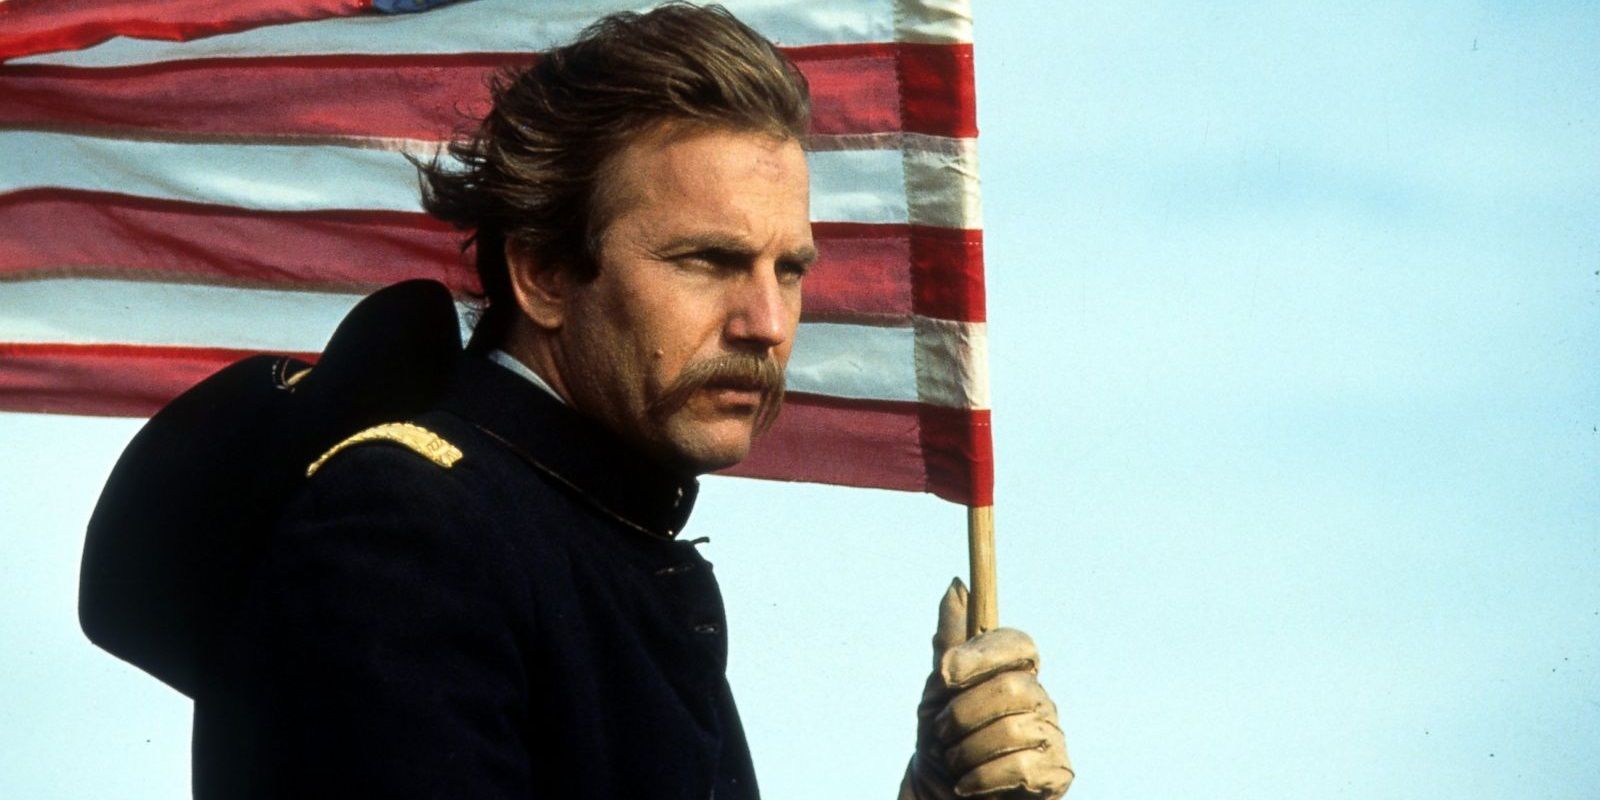 Kevin Costner holding a flag in Dances with Wolves